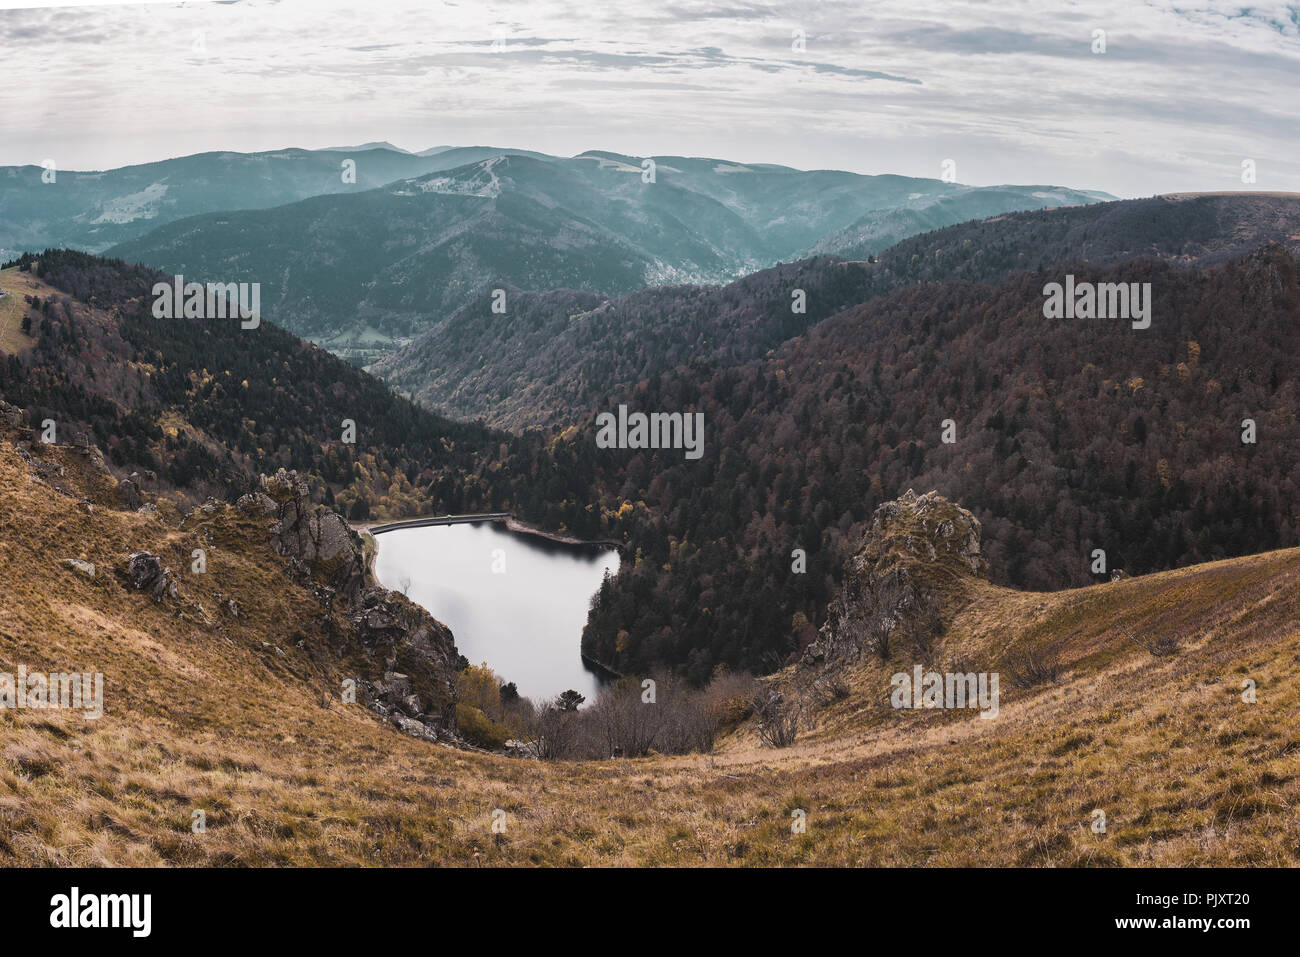 Landscape of the Vosges mountains in fall, scenic overlook on the Schiessrothried Lake and the Wormsa Valley, France. Stock Photo